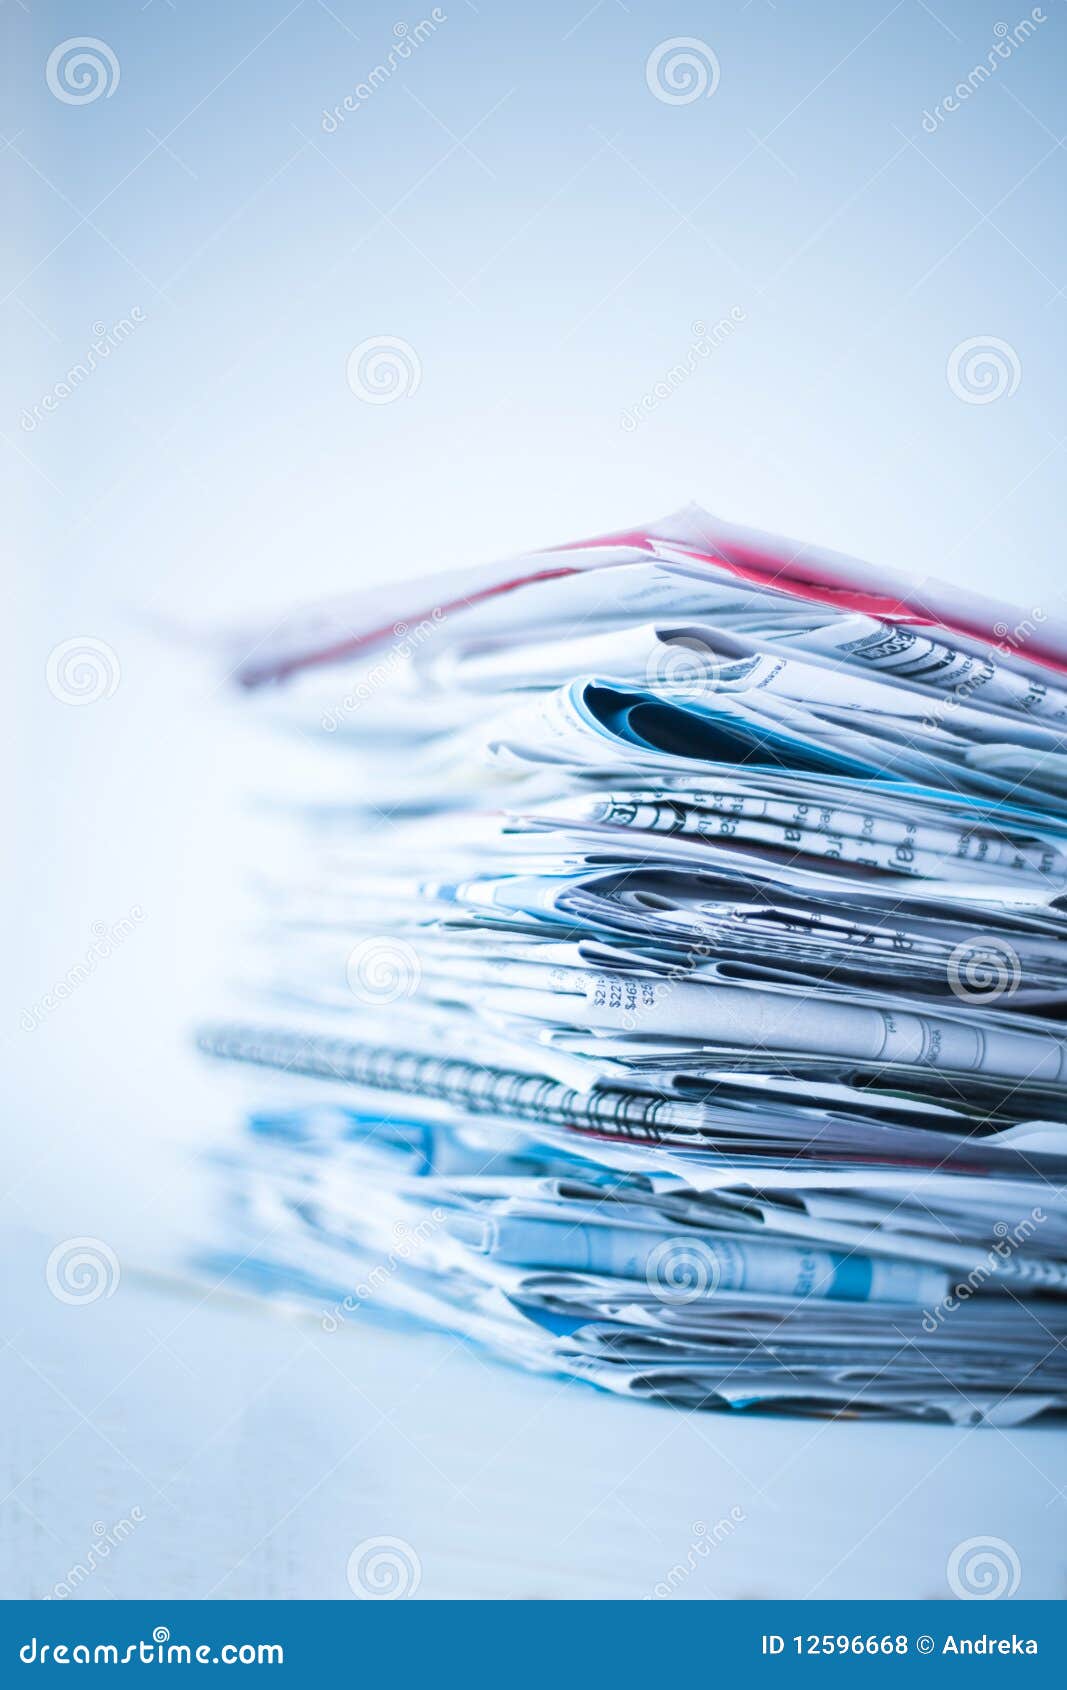 http://www.dreamstime.com/royalty-free-stock-photos-papers-bills-documents-image12596668